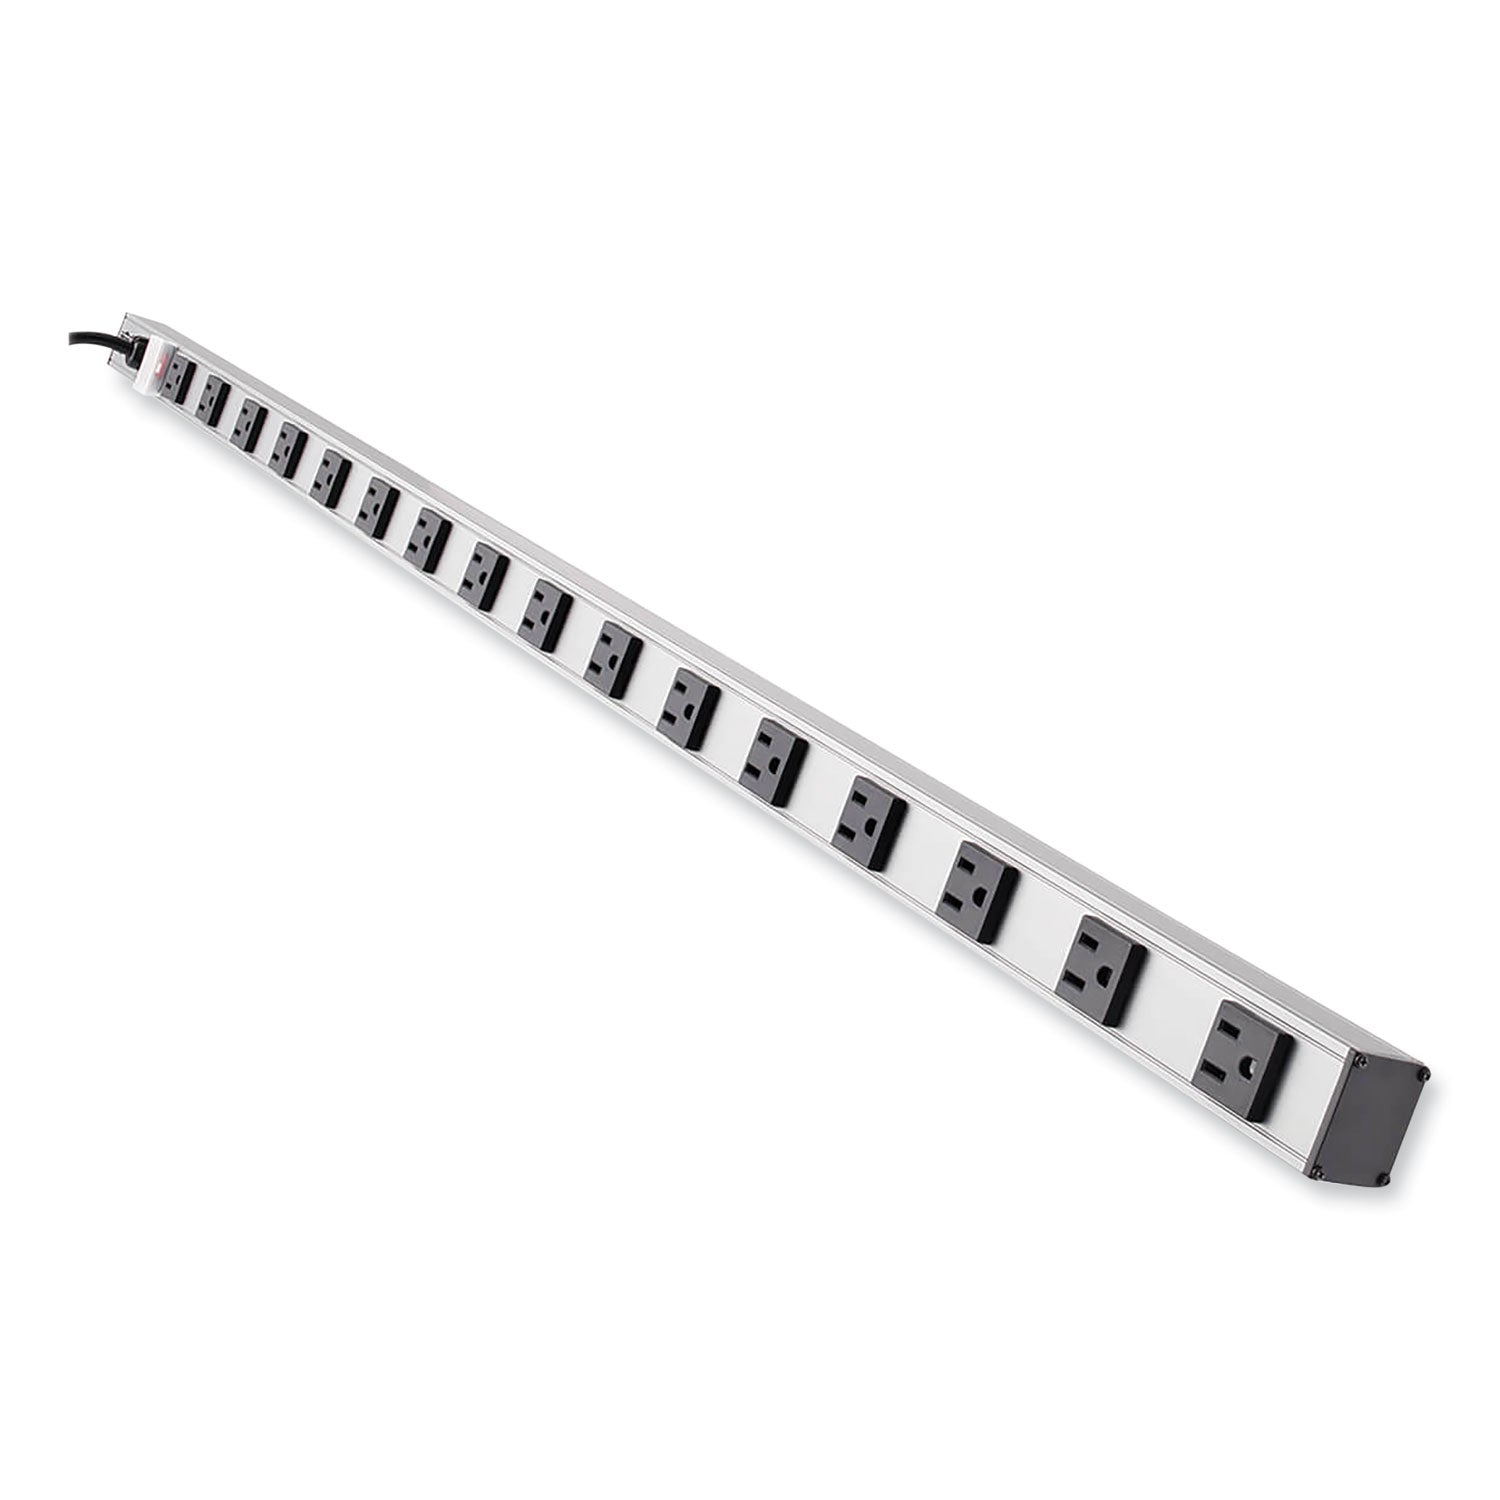 Vertical Power Strip, 16 Outlets, 15 ft Cord, Silver - 